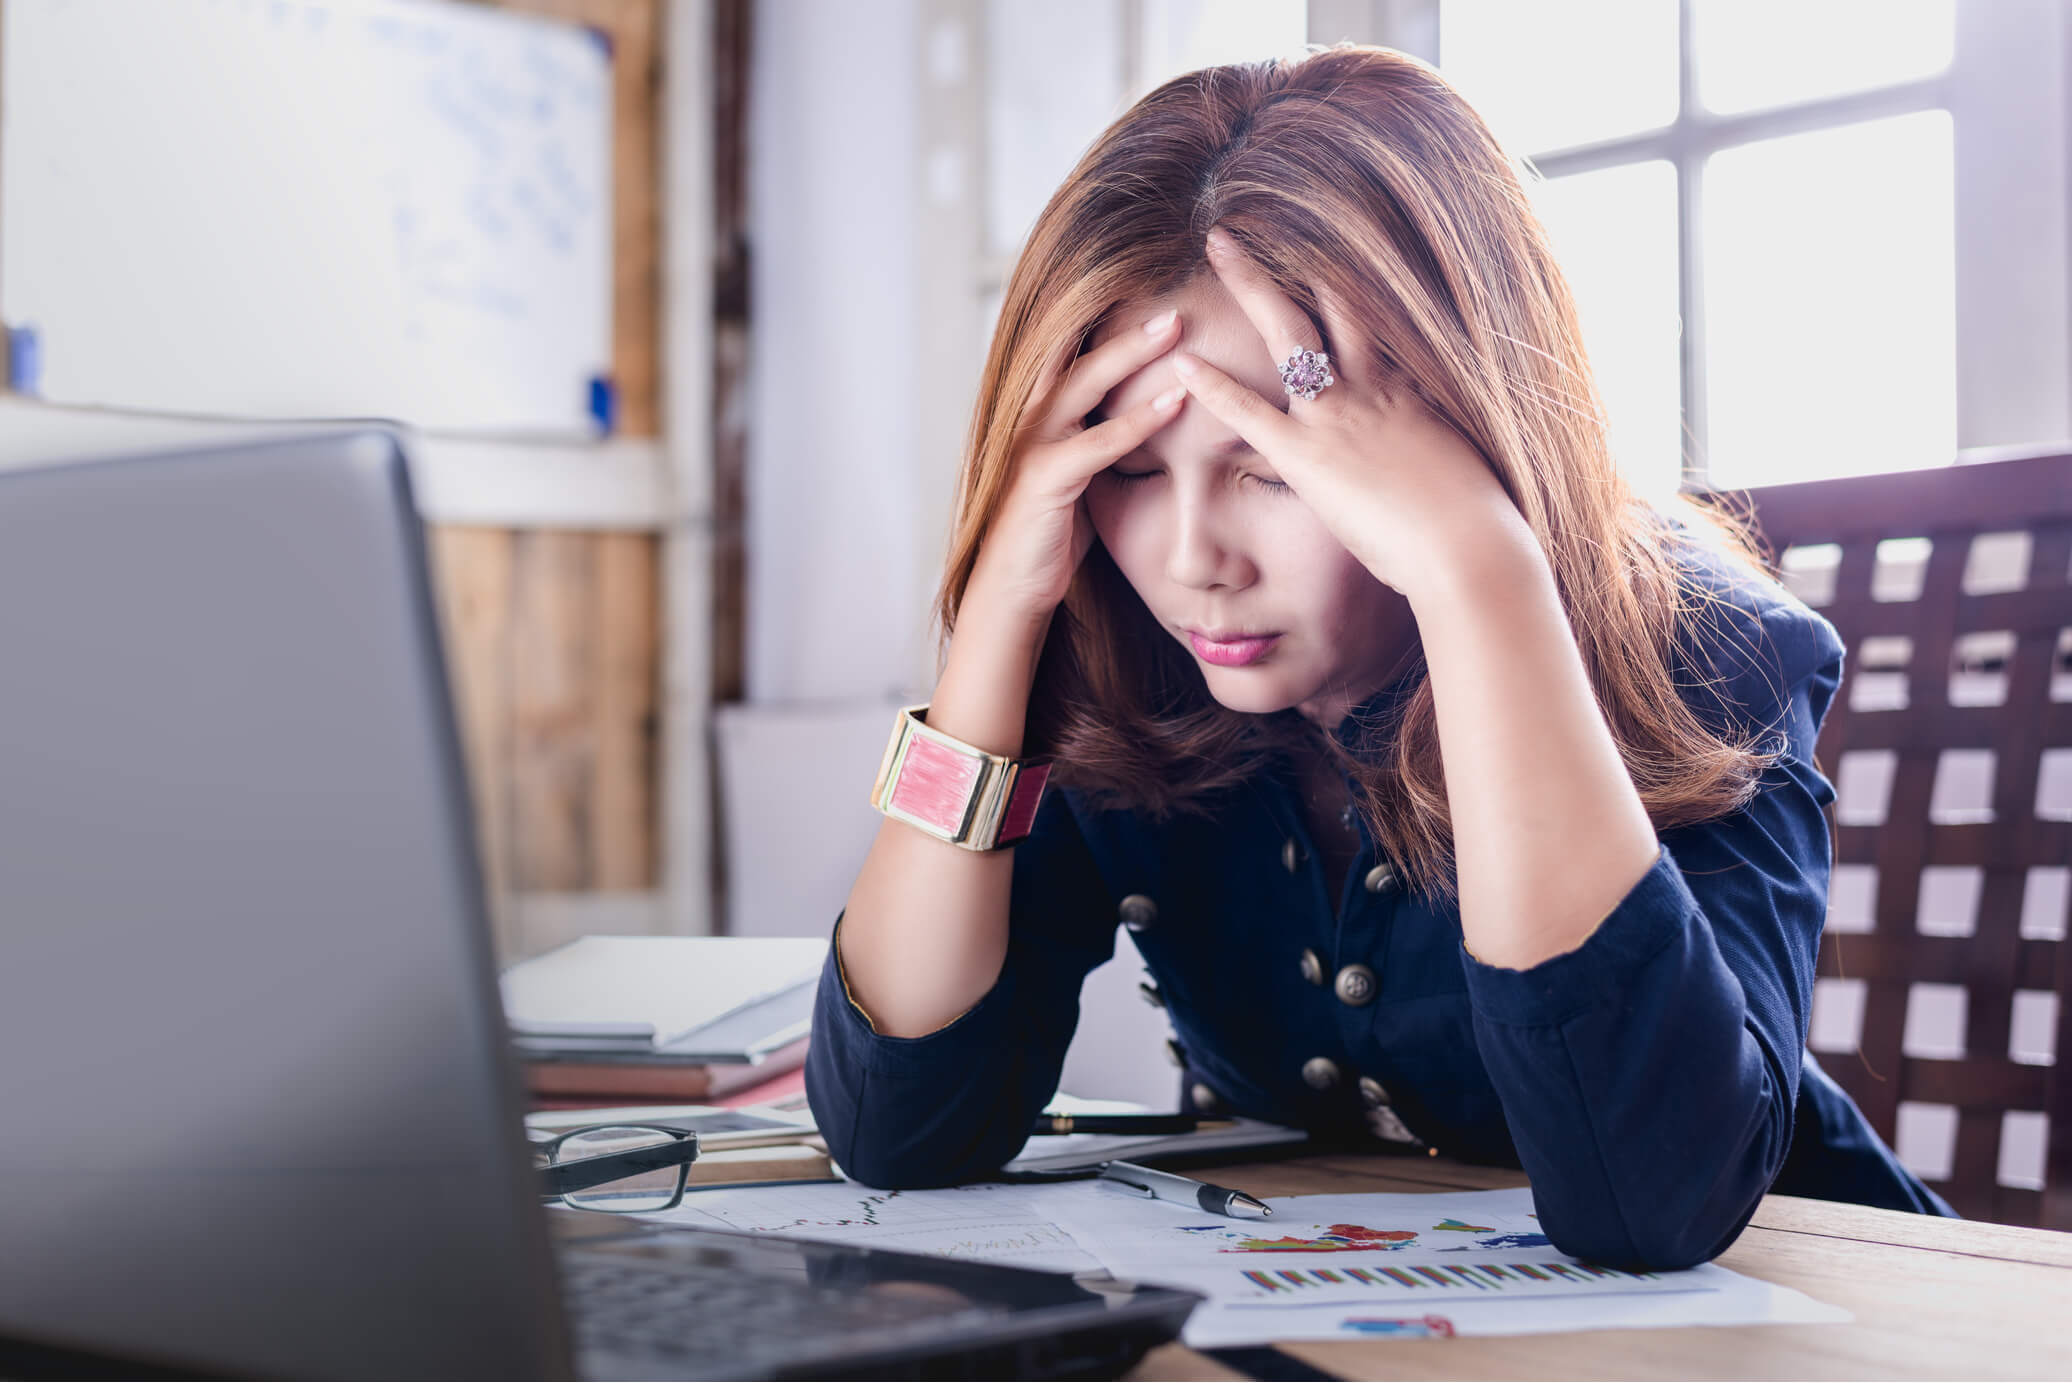 Feeling Stress at Work? Learn to Stress Well